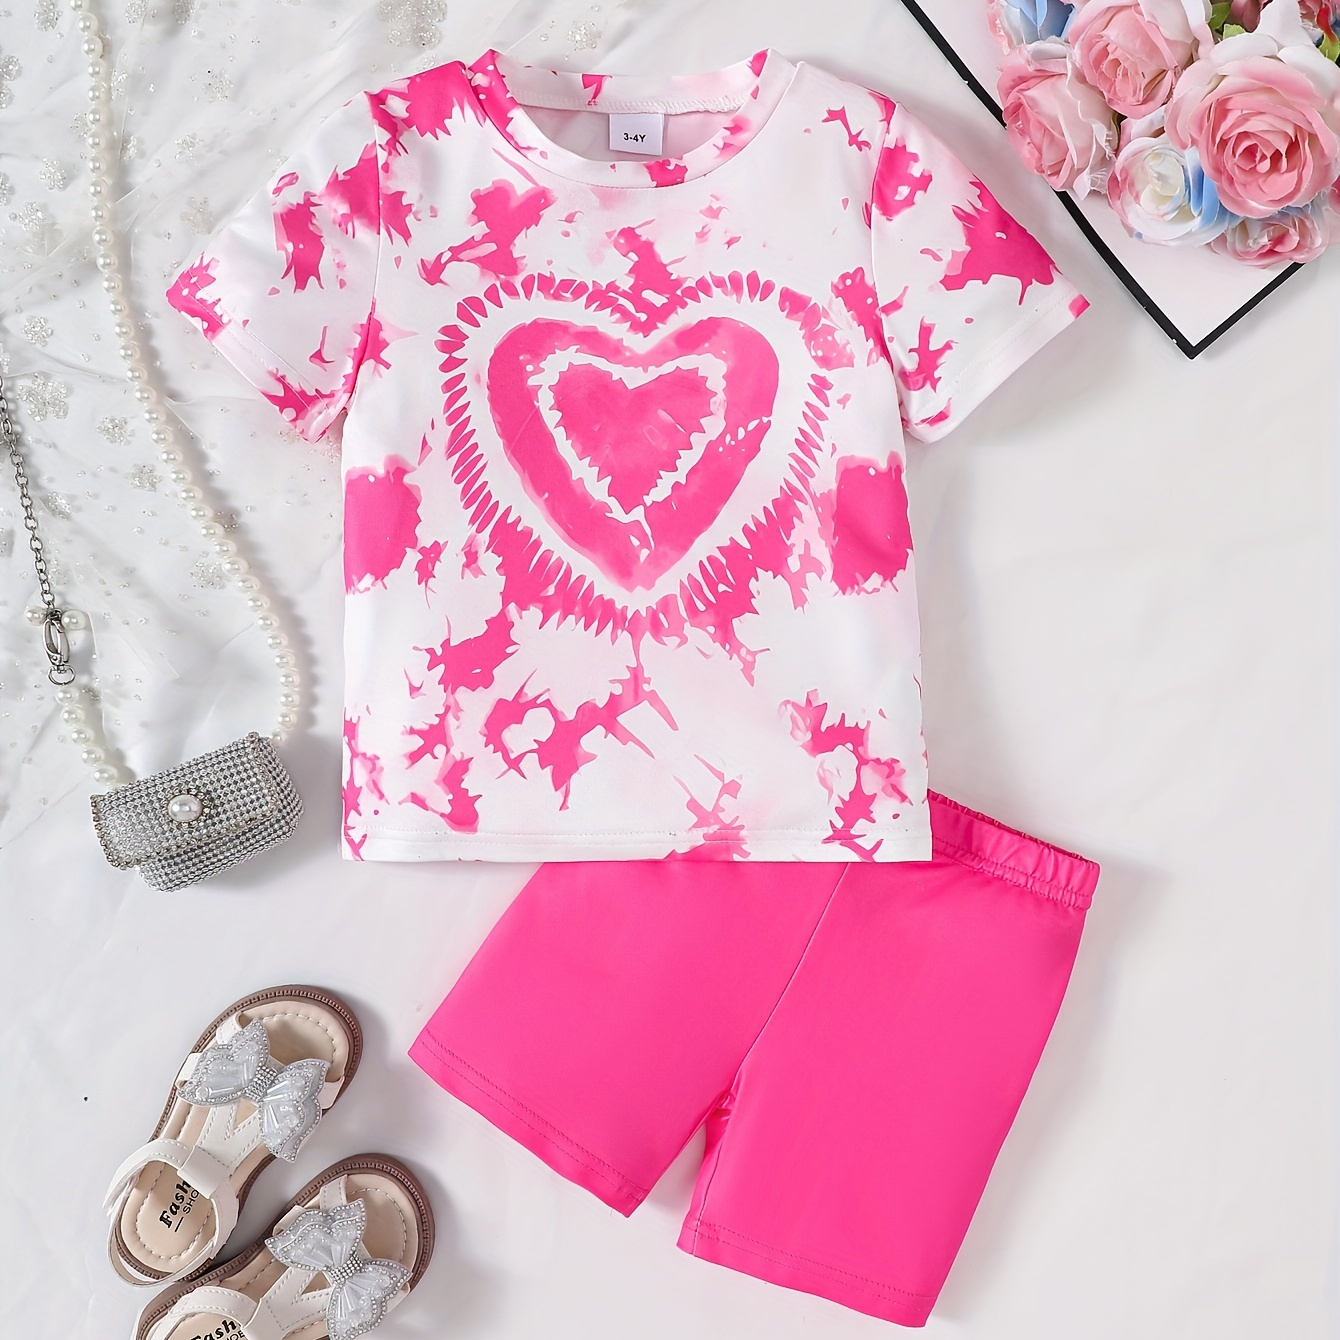 

Girl's Heart Print 2pcs Summer Casual Outfit, Tie-dye T-shirt & Shorts Set, Girl's Sporty Style Clothes